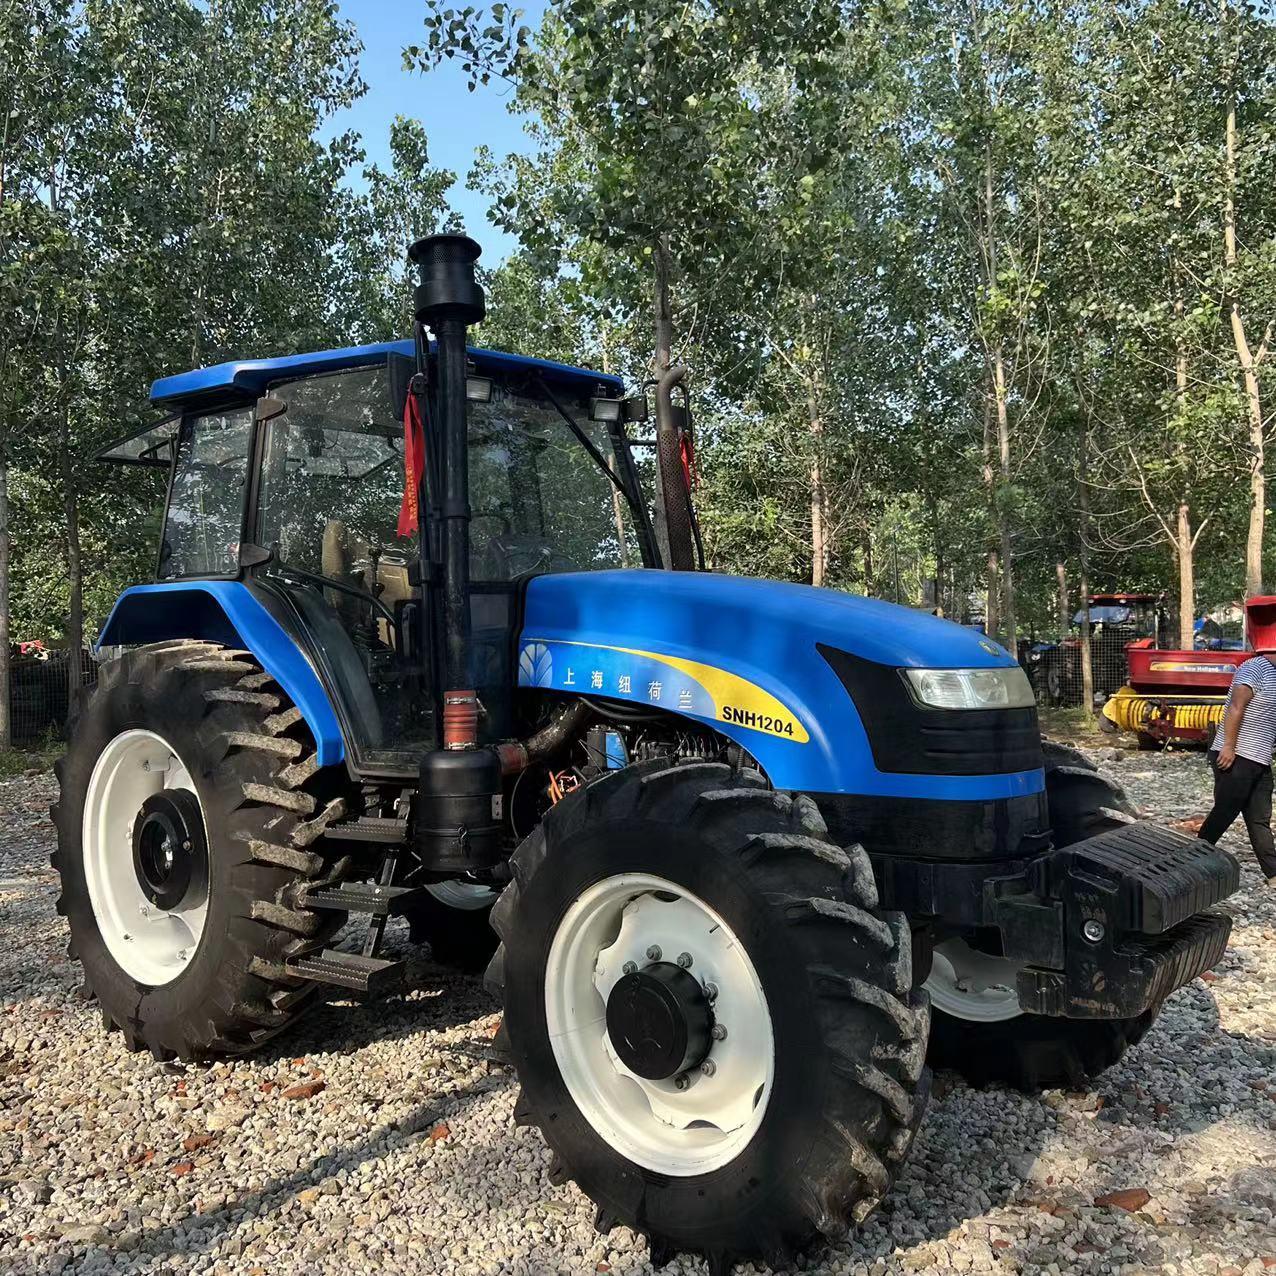 NEW HOLLAND SNH1204